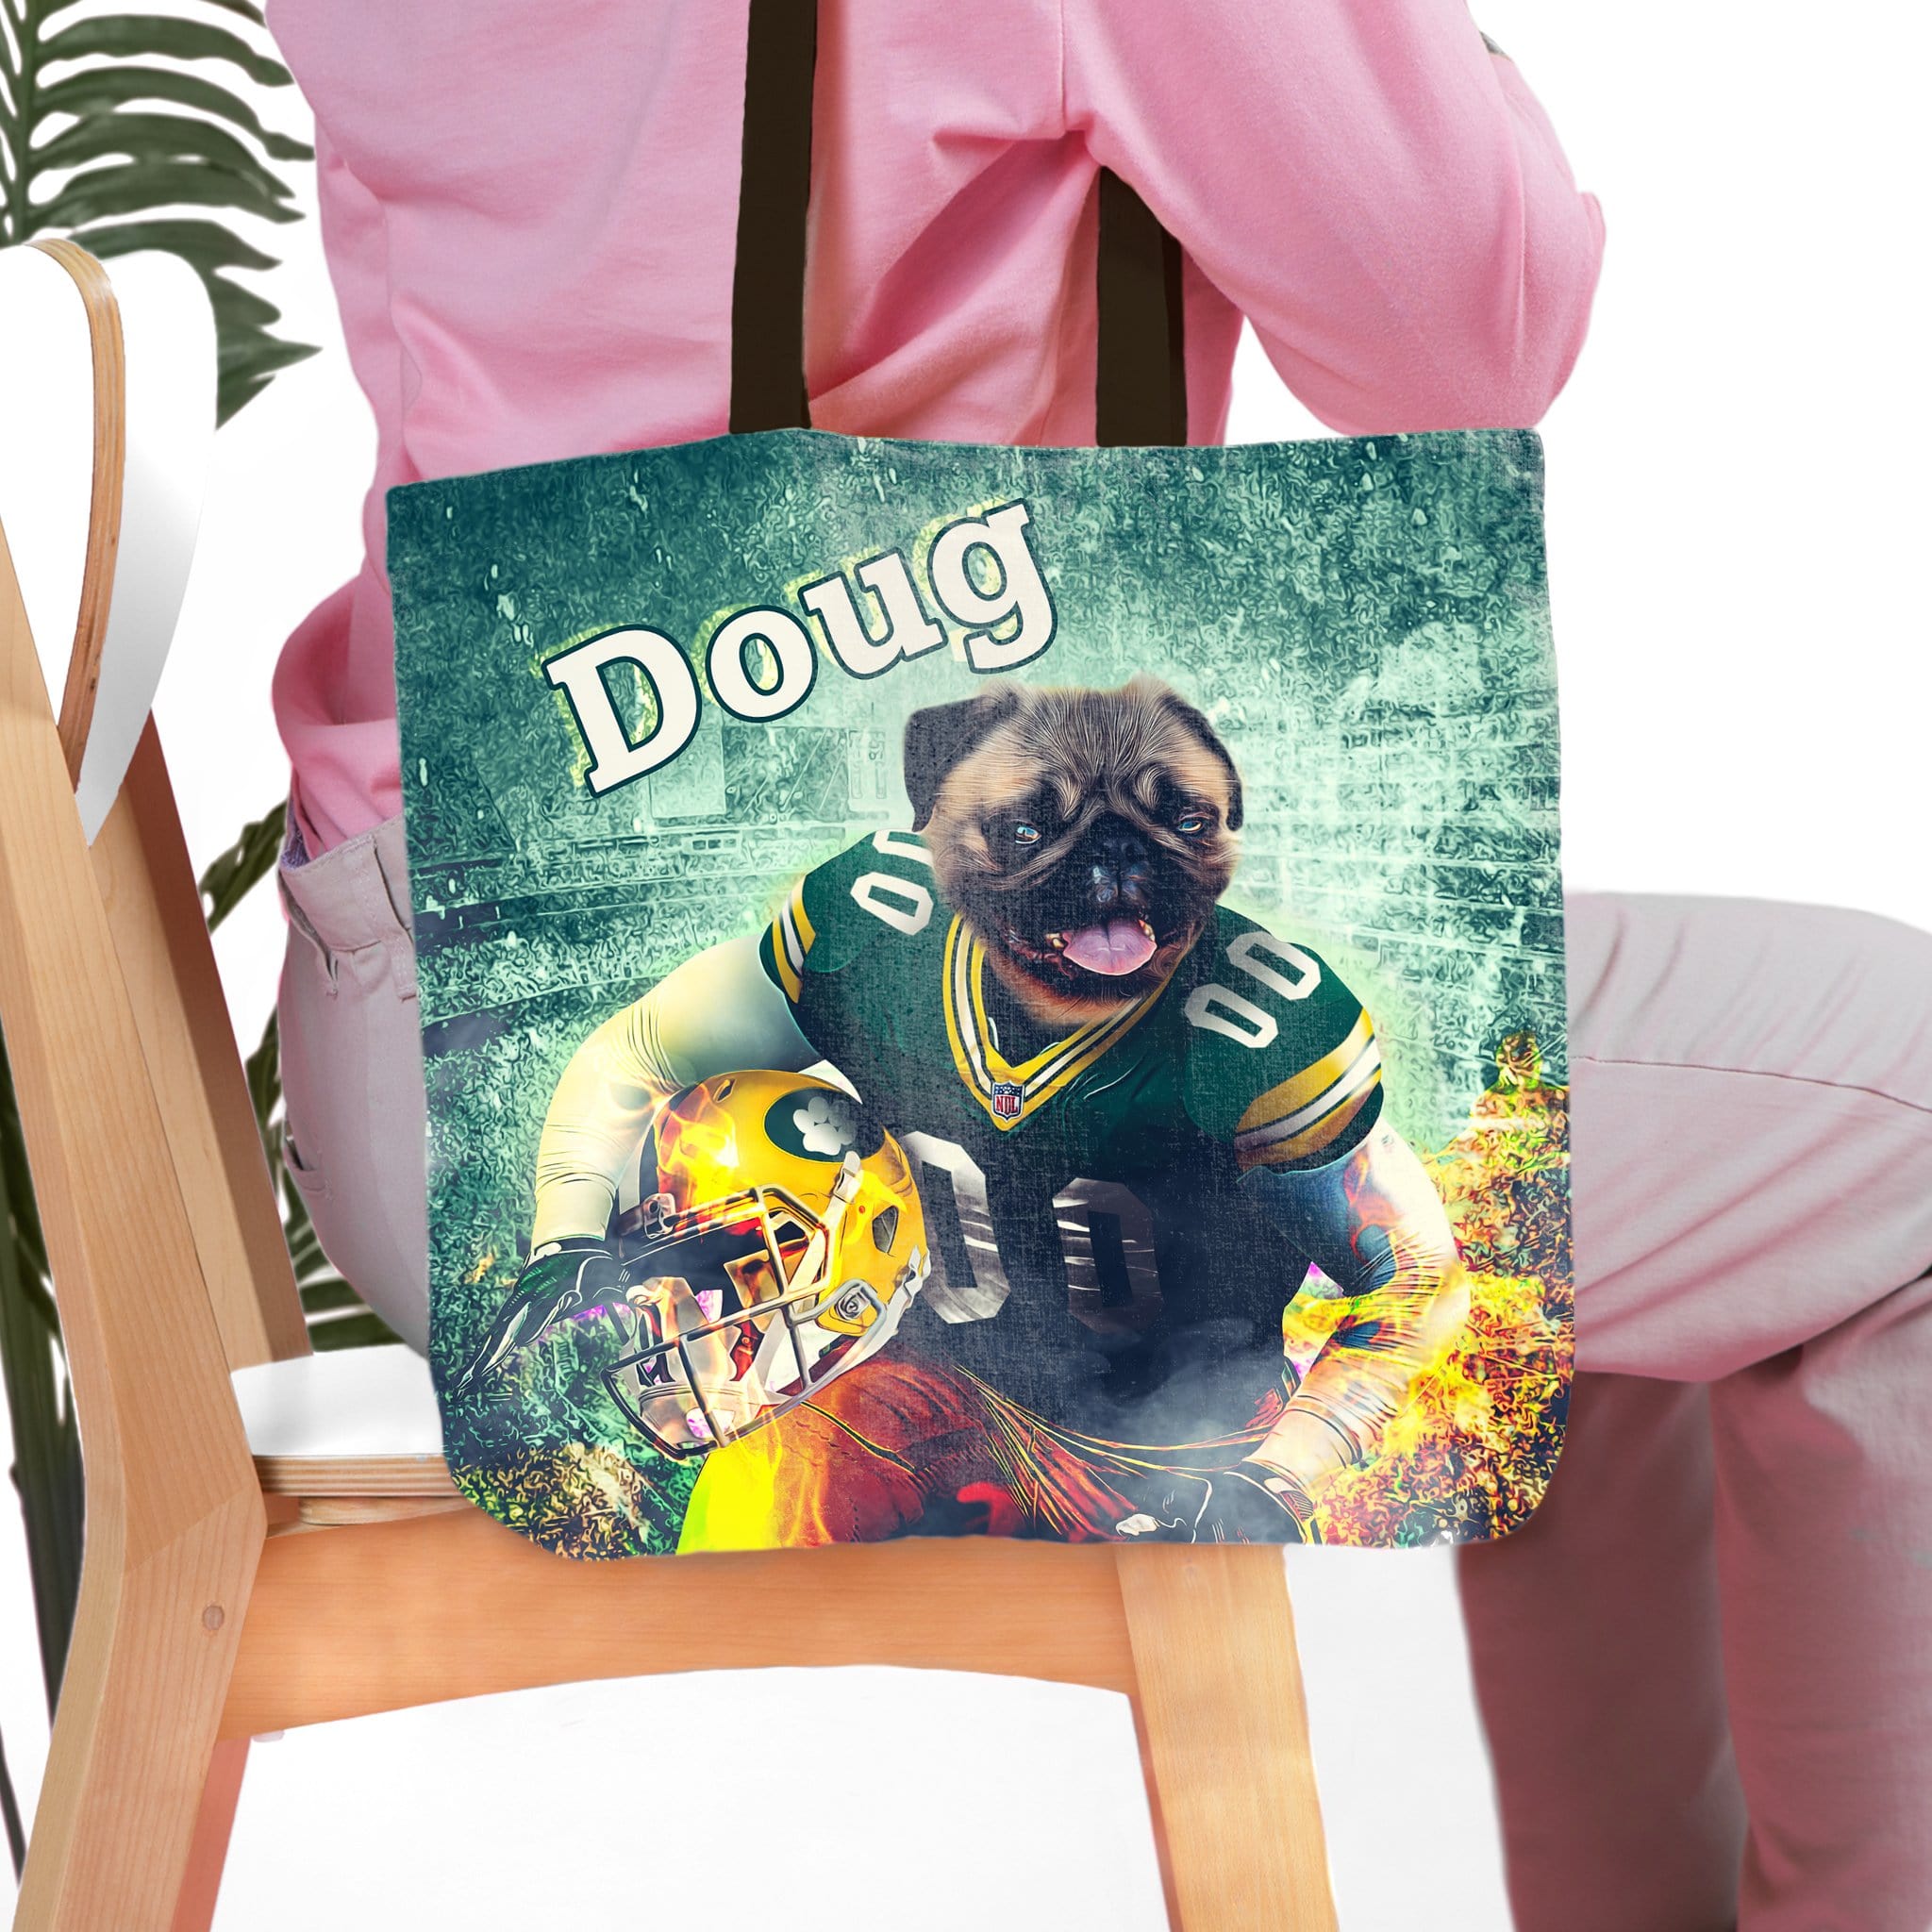 &#39;Green Bay Doggos&#39; Personalized Tote Bag